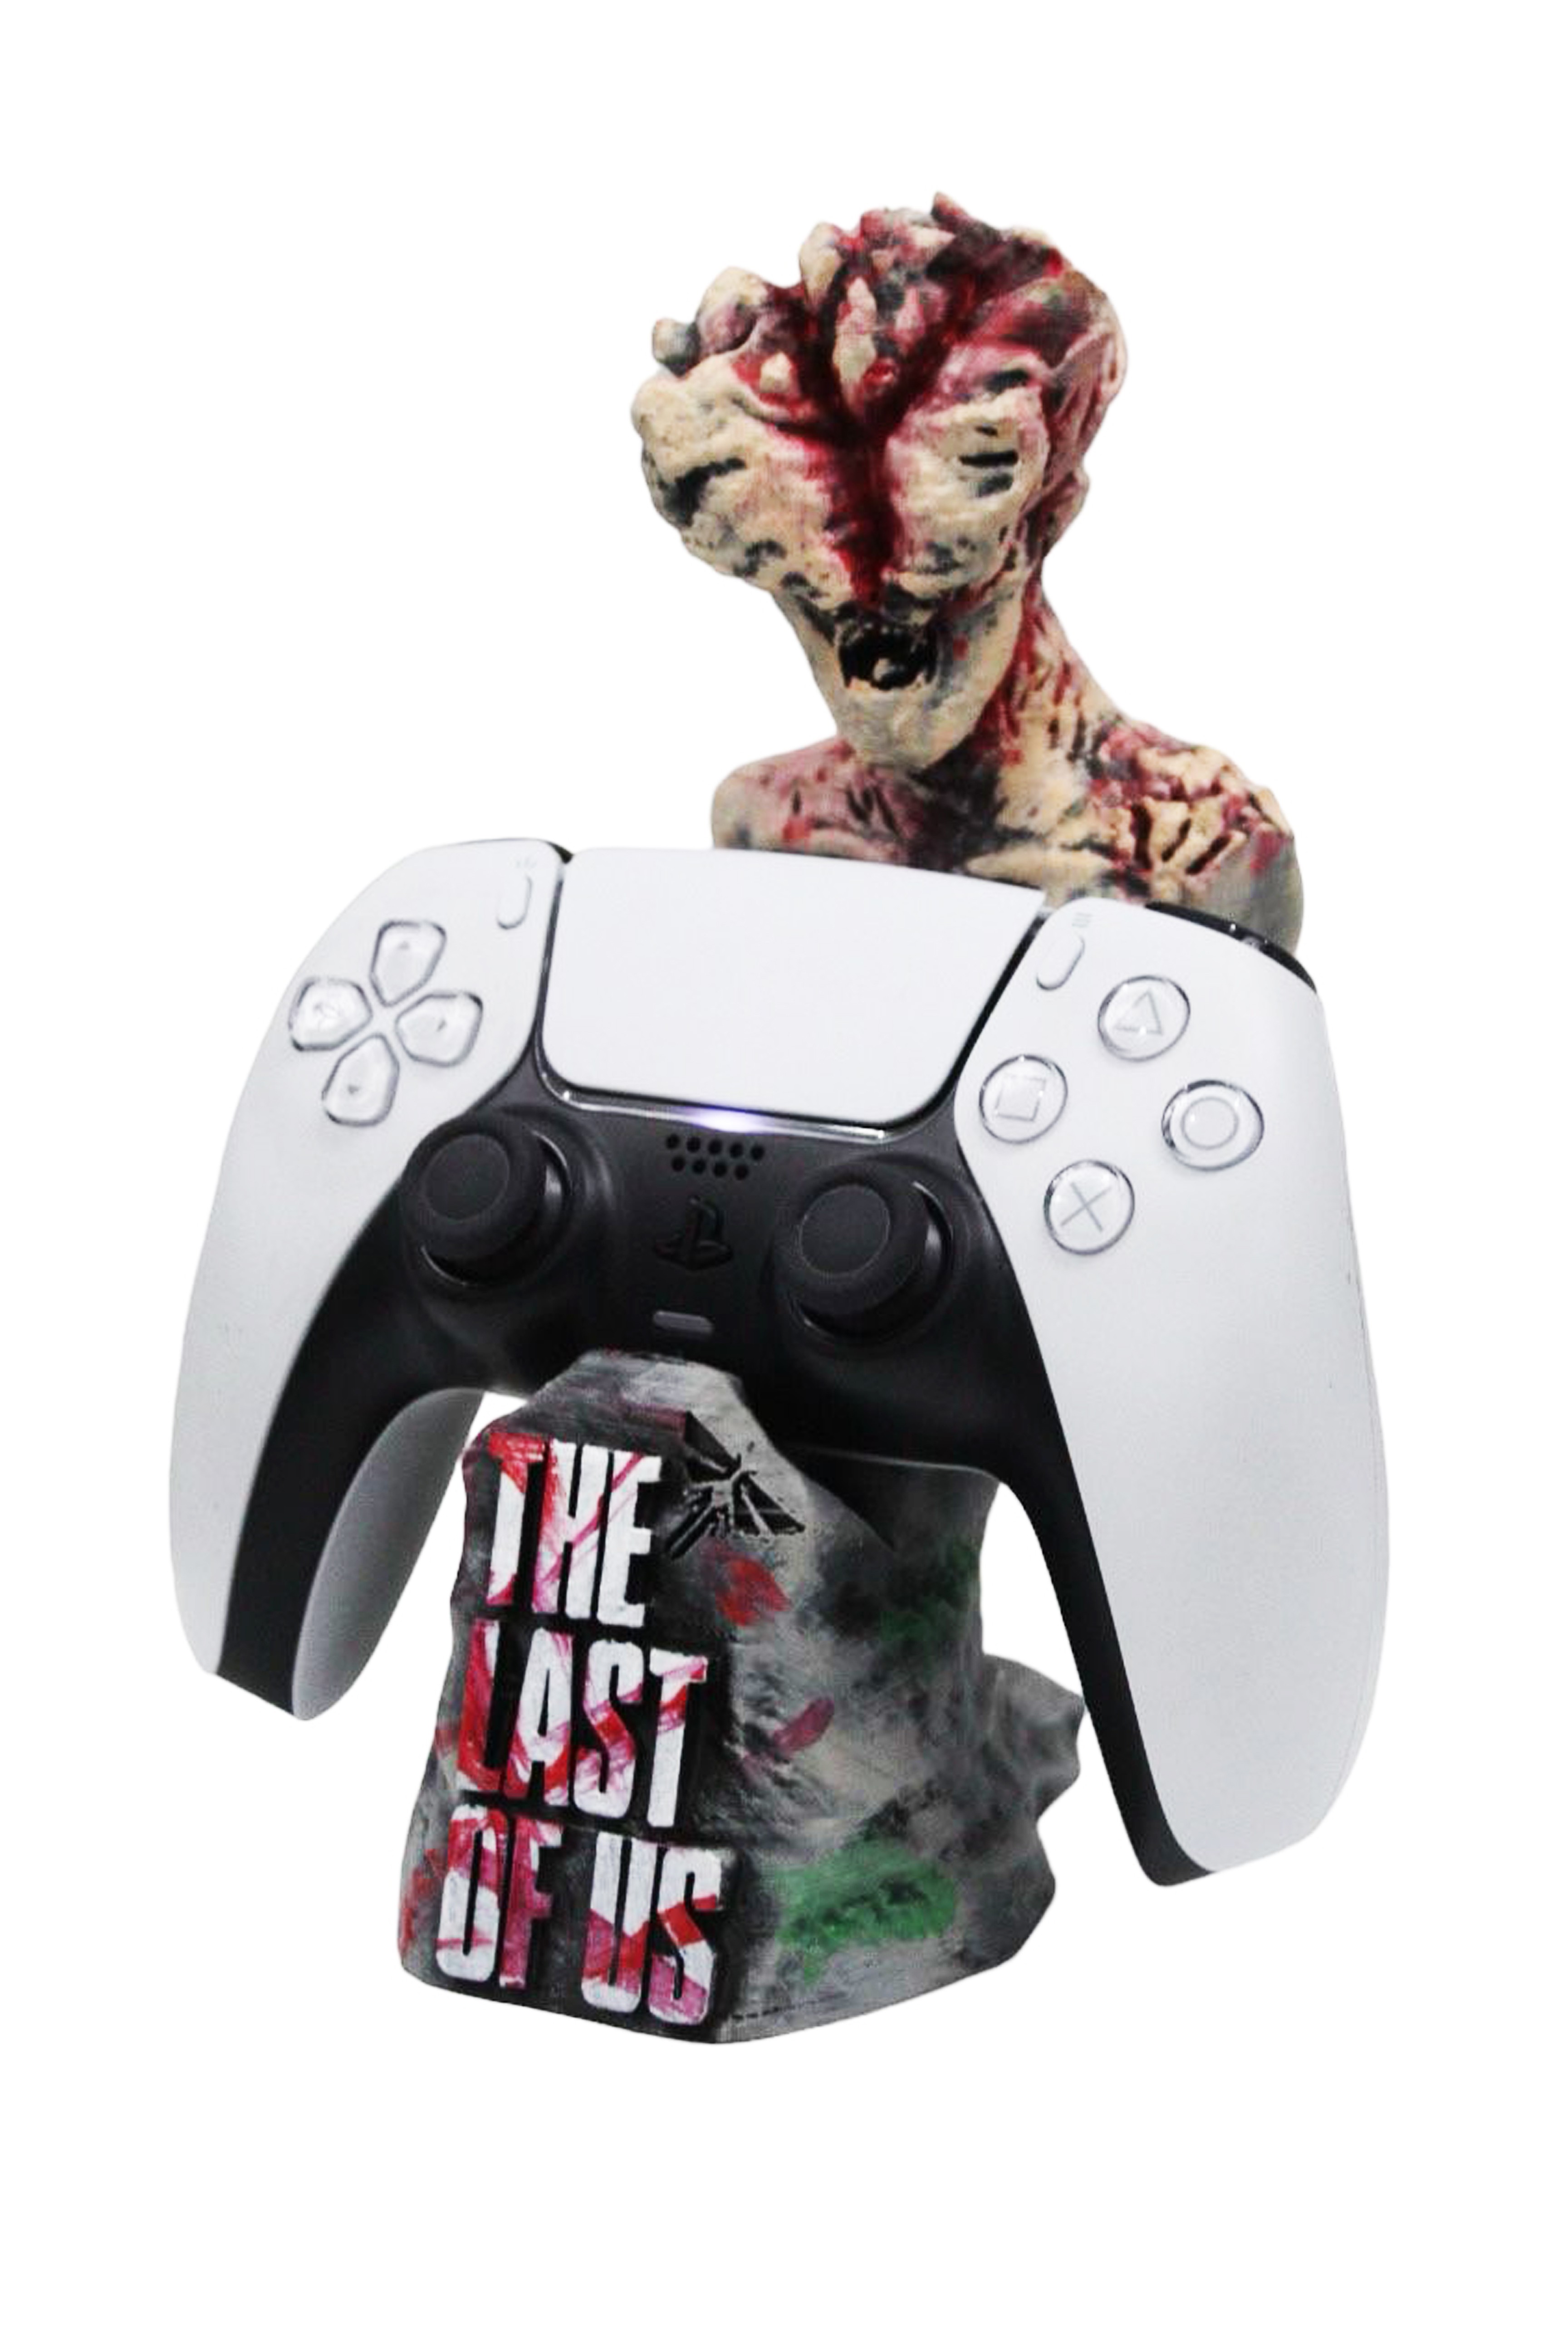 The Last Of Us Clicker Controls Stand Arm Holder Joystick Stand